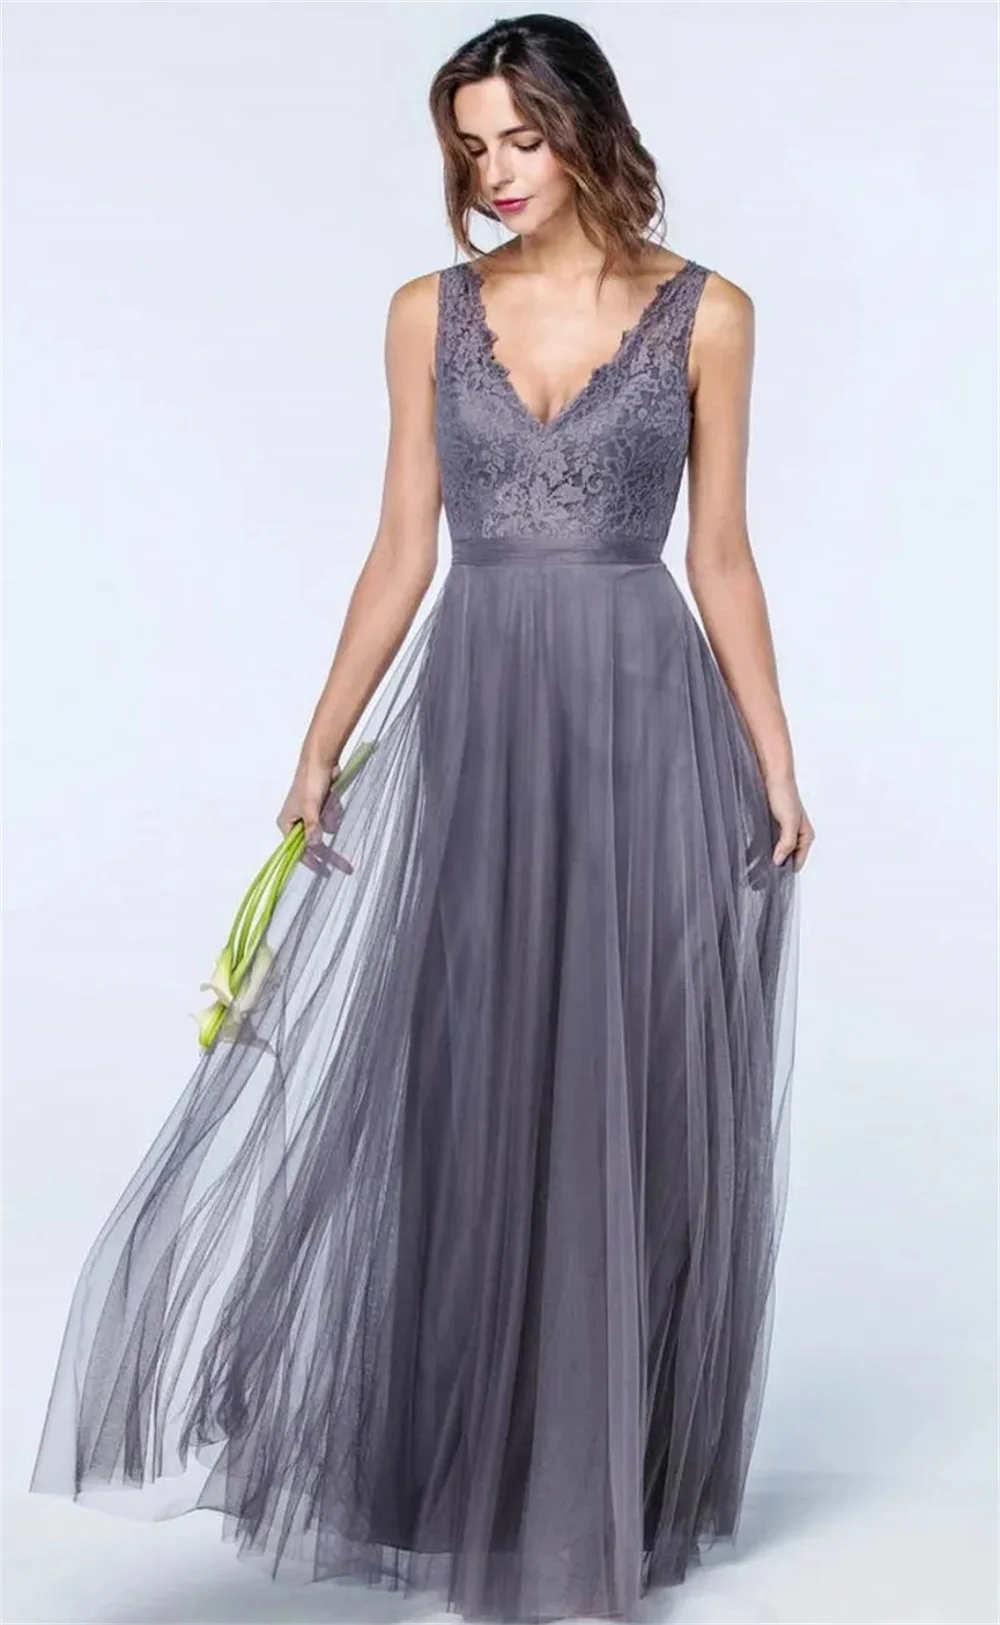 

Simple Prom Dresses V-Neck Sleeveless Lace Appliques A-Line Tullle Floor-Length Evening Dress Bridesmaid Dress New Formal Dress